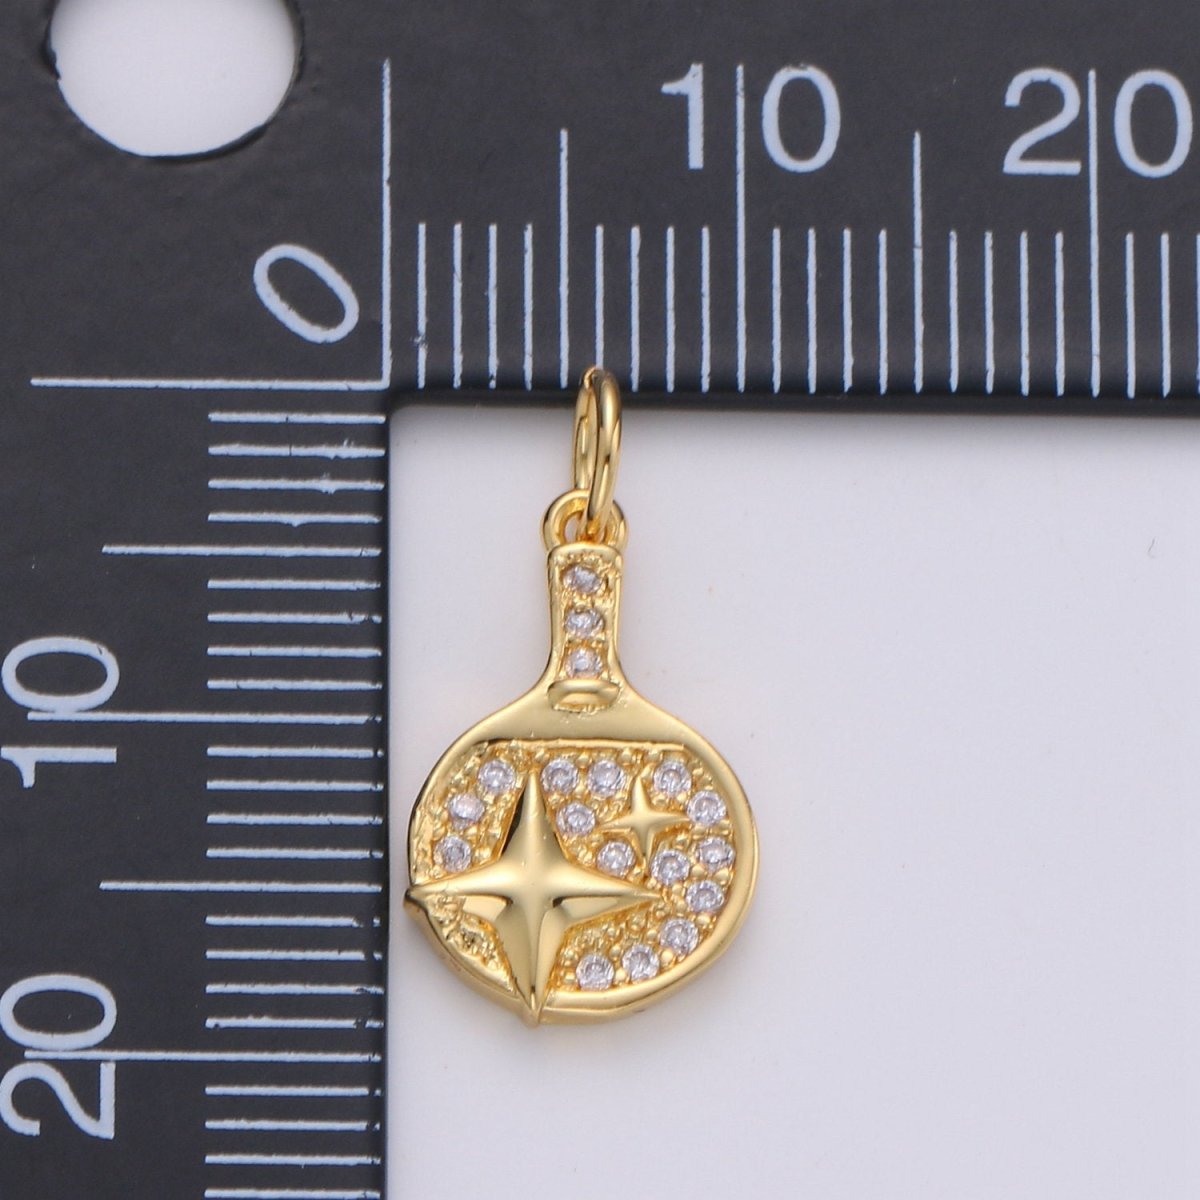 Dainty Gold Cubic North Star charm, CZ, Brass, Nickel free, Star pendant, Necklace supplies, Jewelry makings for Bracelet Earring Component D-281 D-282 - DLUXCA